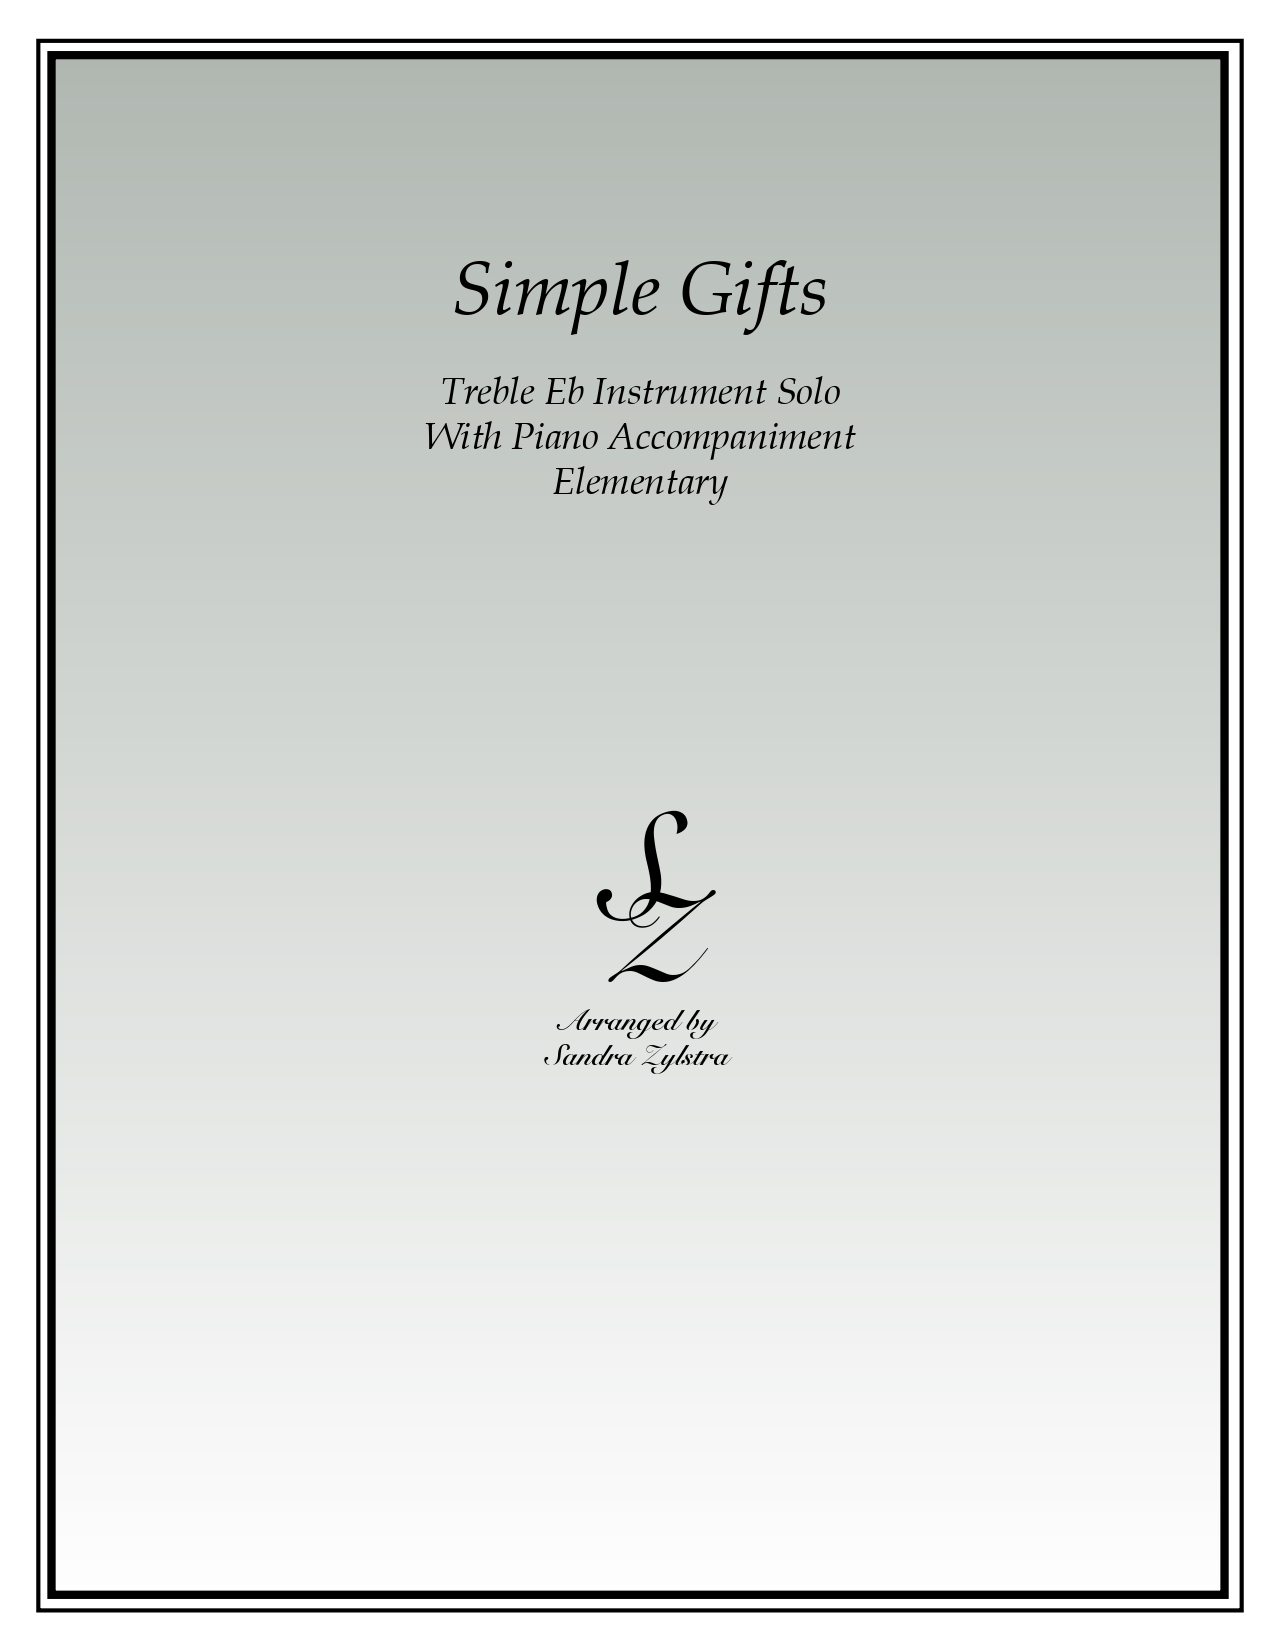 Simple Gifts Eb instrument solo part cover page 00011